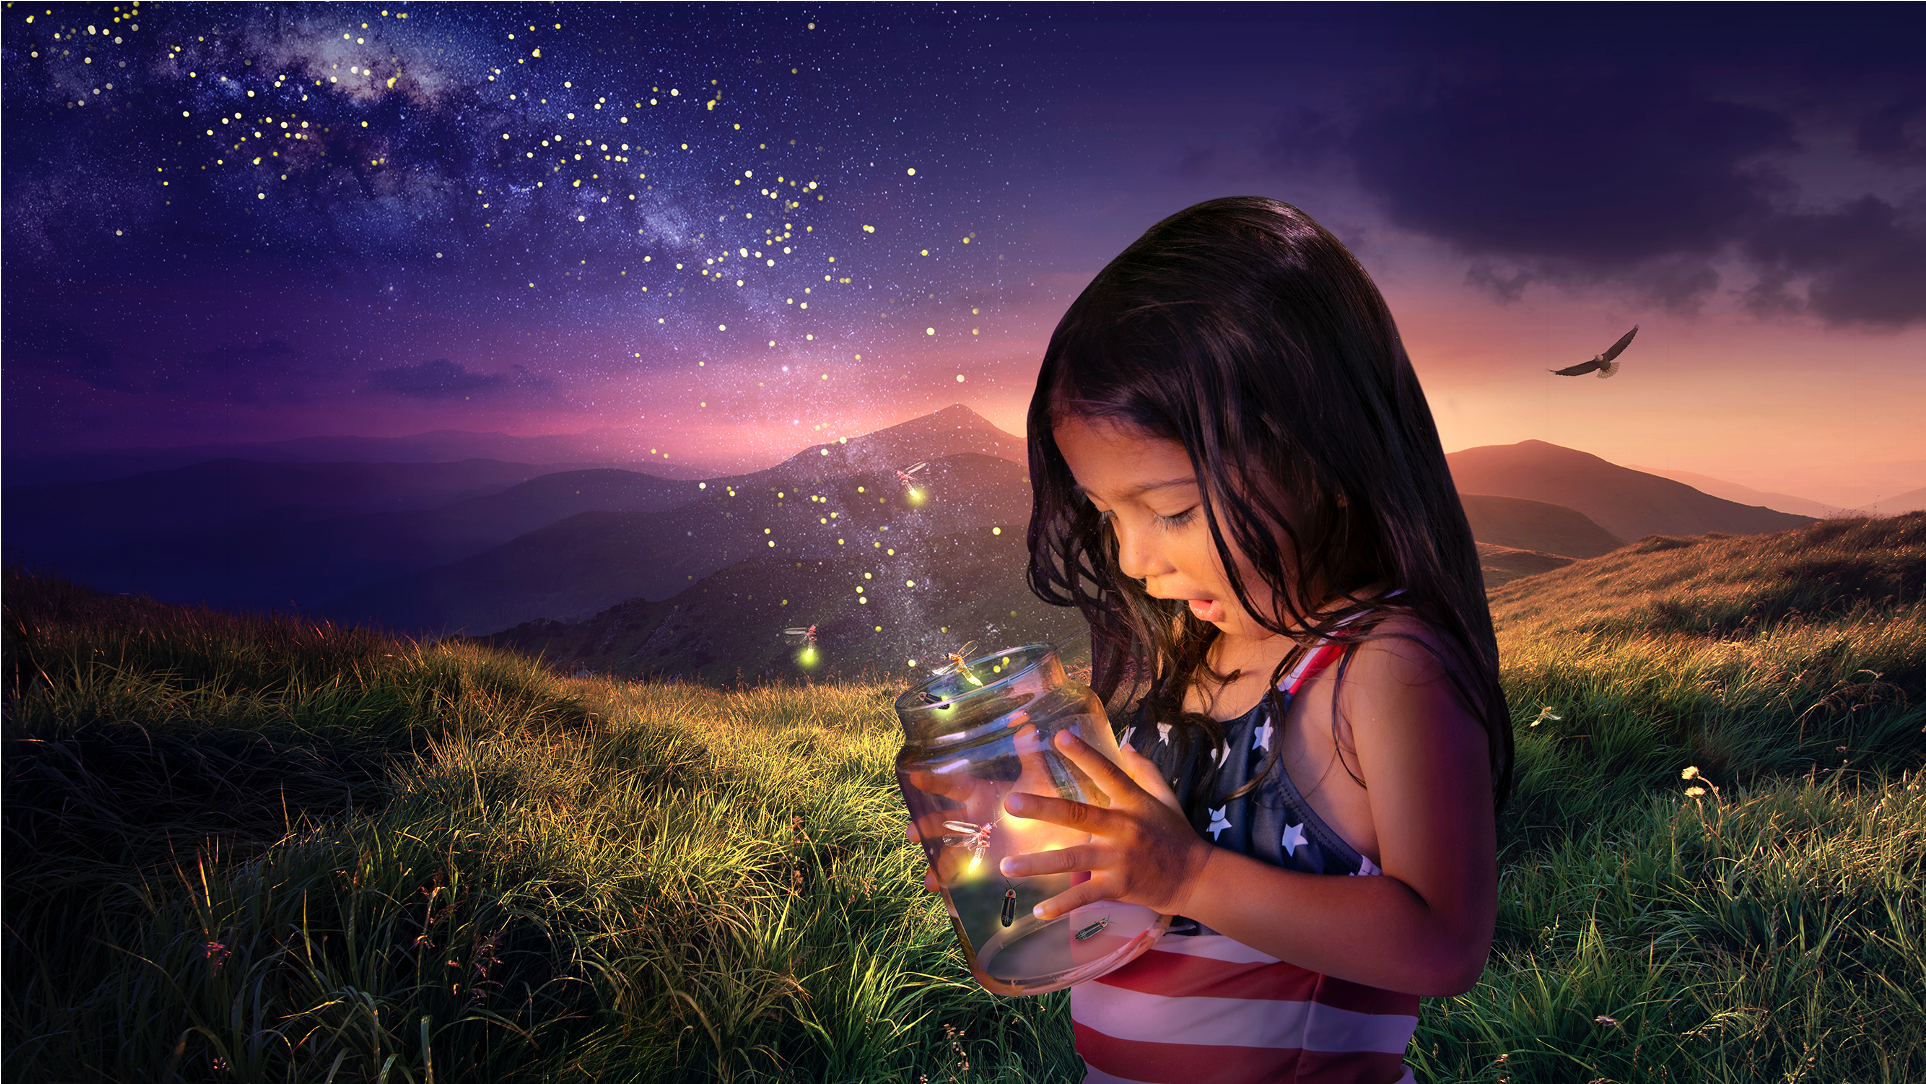 A photo of a young girl standing in a field at dusk in front of a mountain range. She is holding a clear glass bottle filled with fireflies that extend out into the night sky creating a constellation of stars.